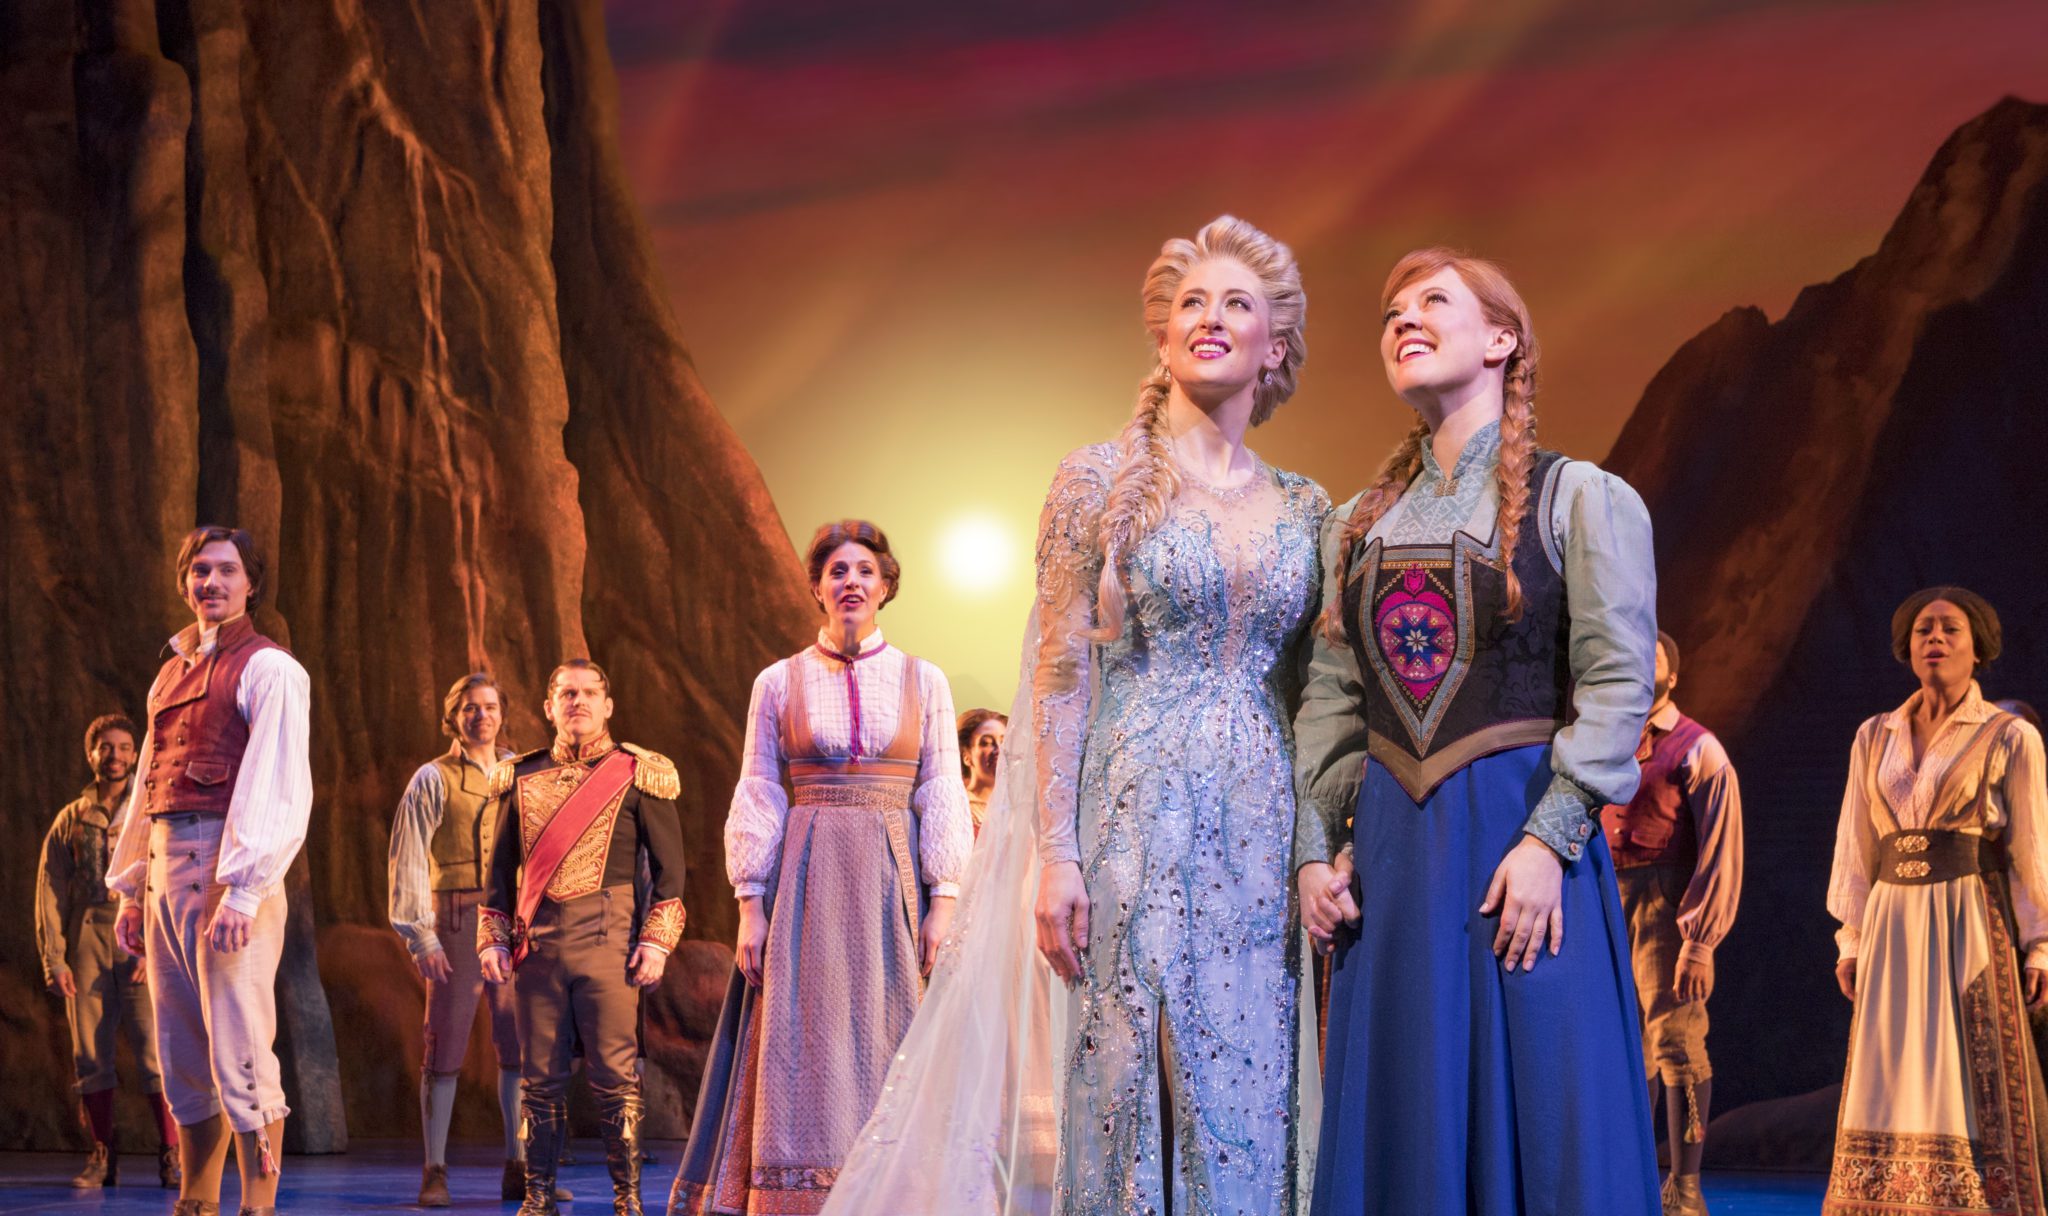 Take the kids to see Frozen on Broadway